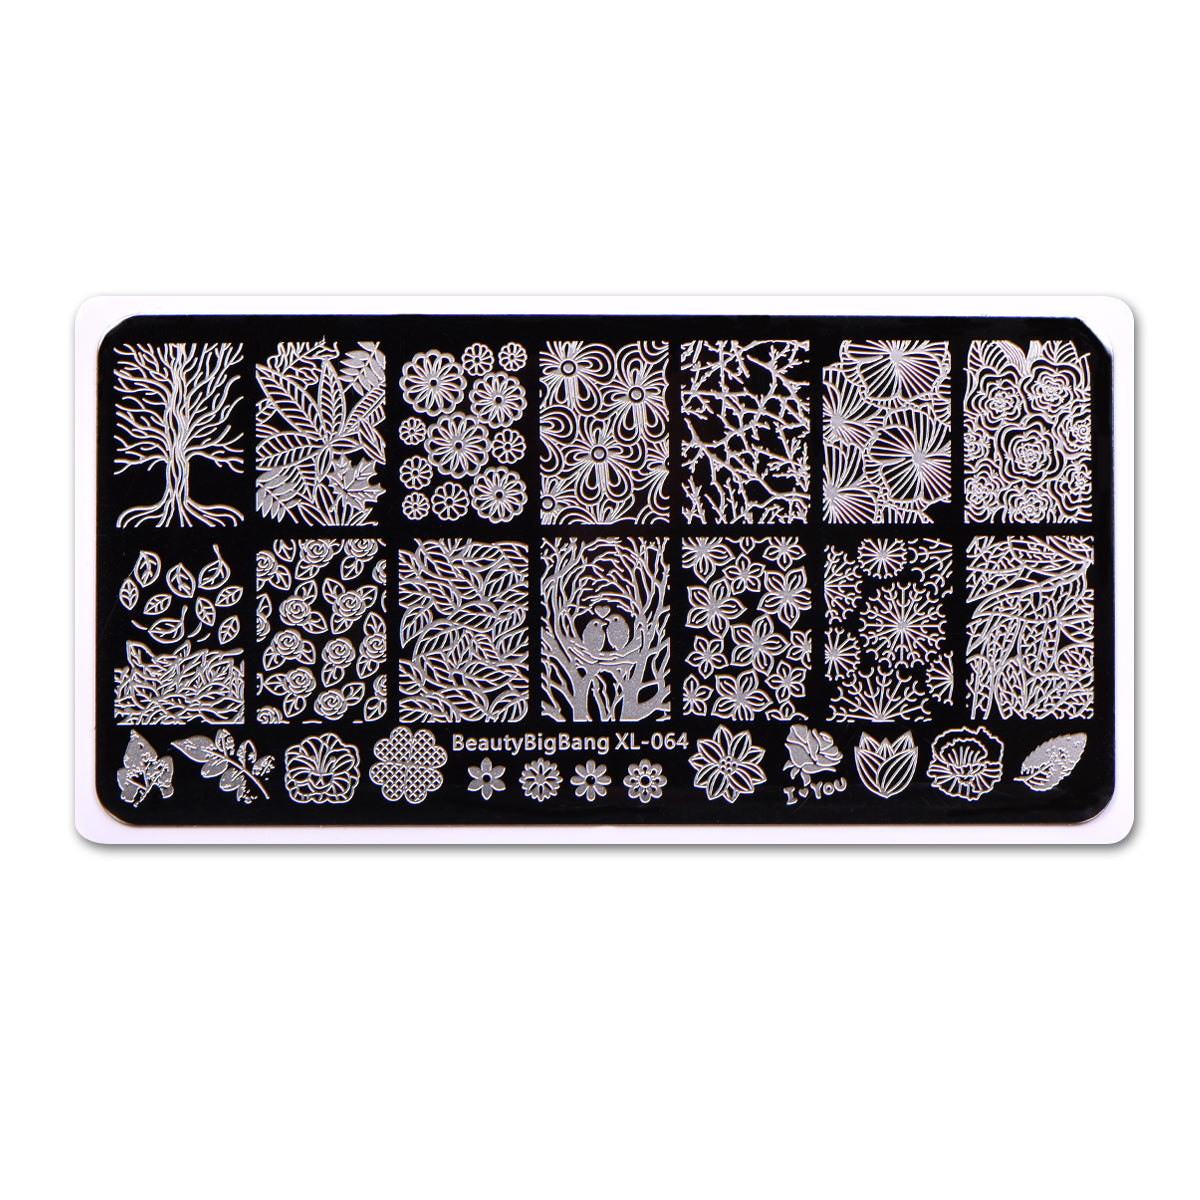 Floral Theme Rectangle Nail Stamping Plate Tree Leaf Design BBBXL-064 ...